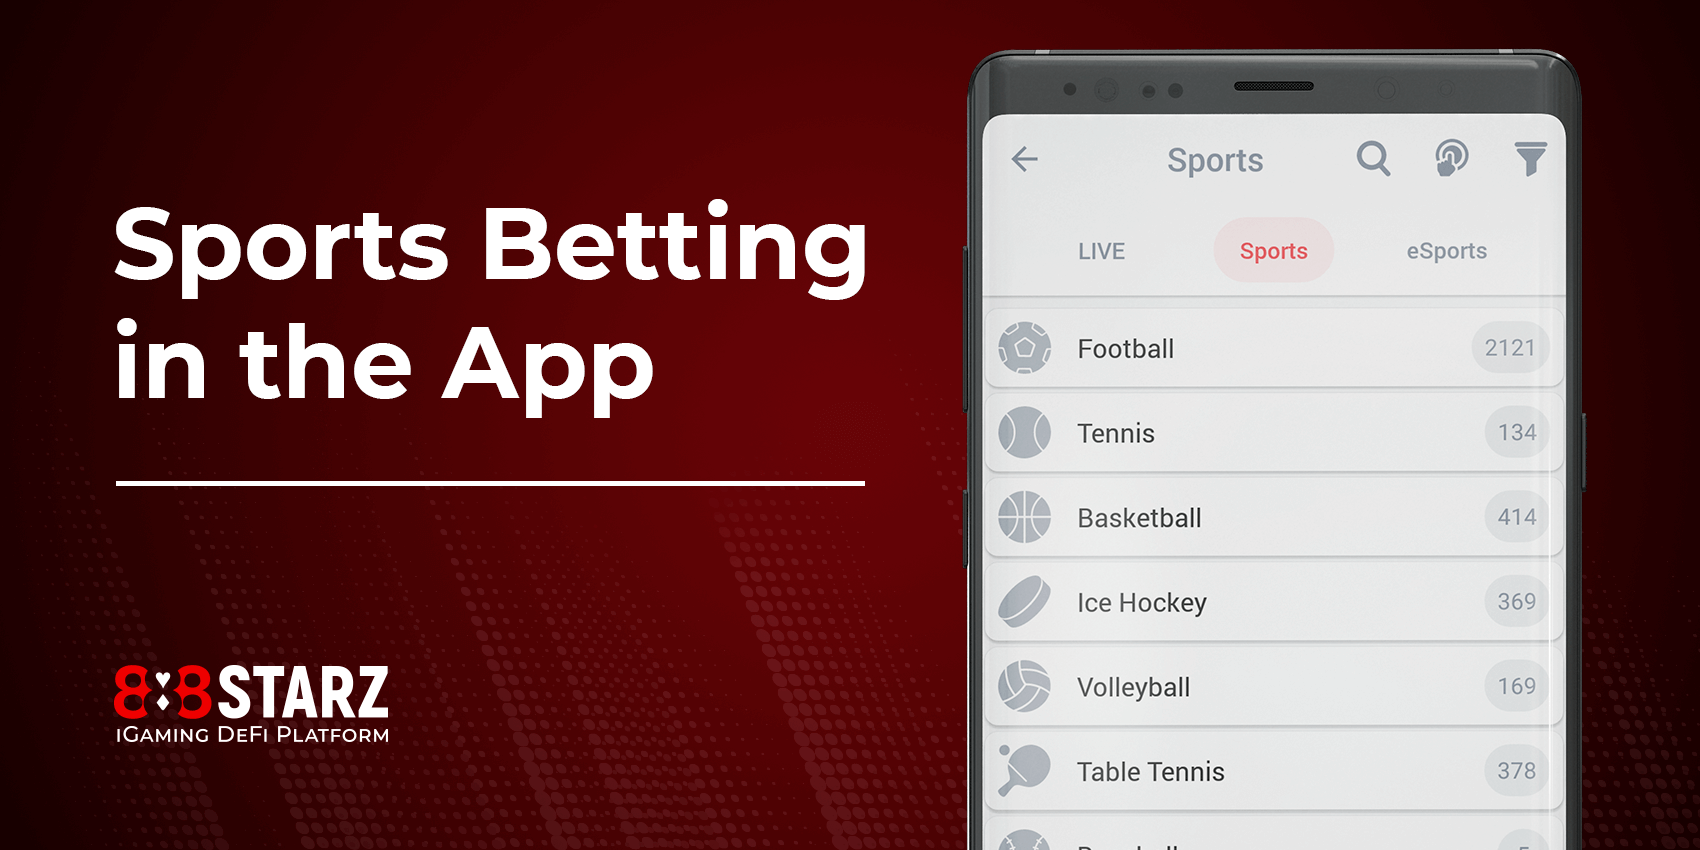 888Starz Sports Betting Options in Application